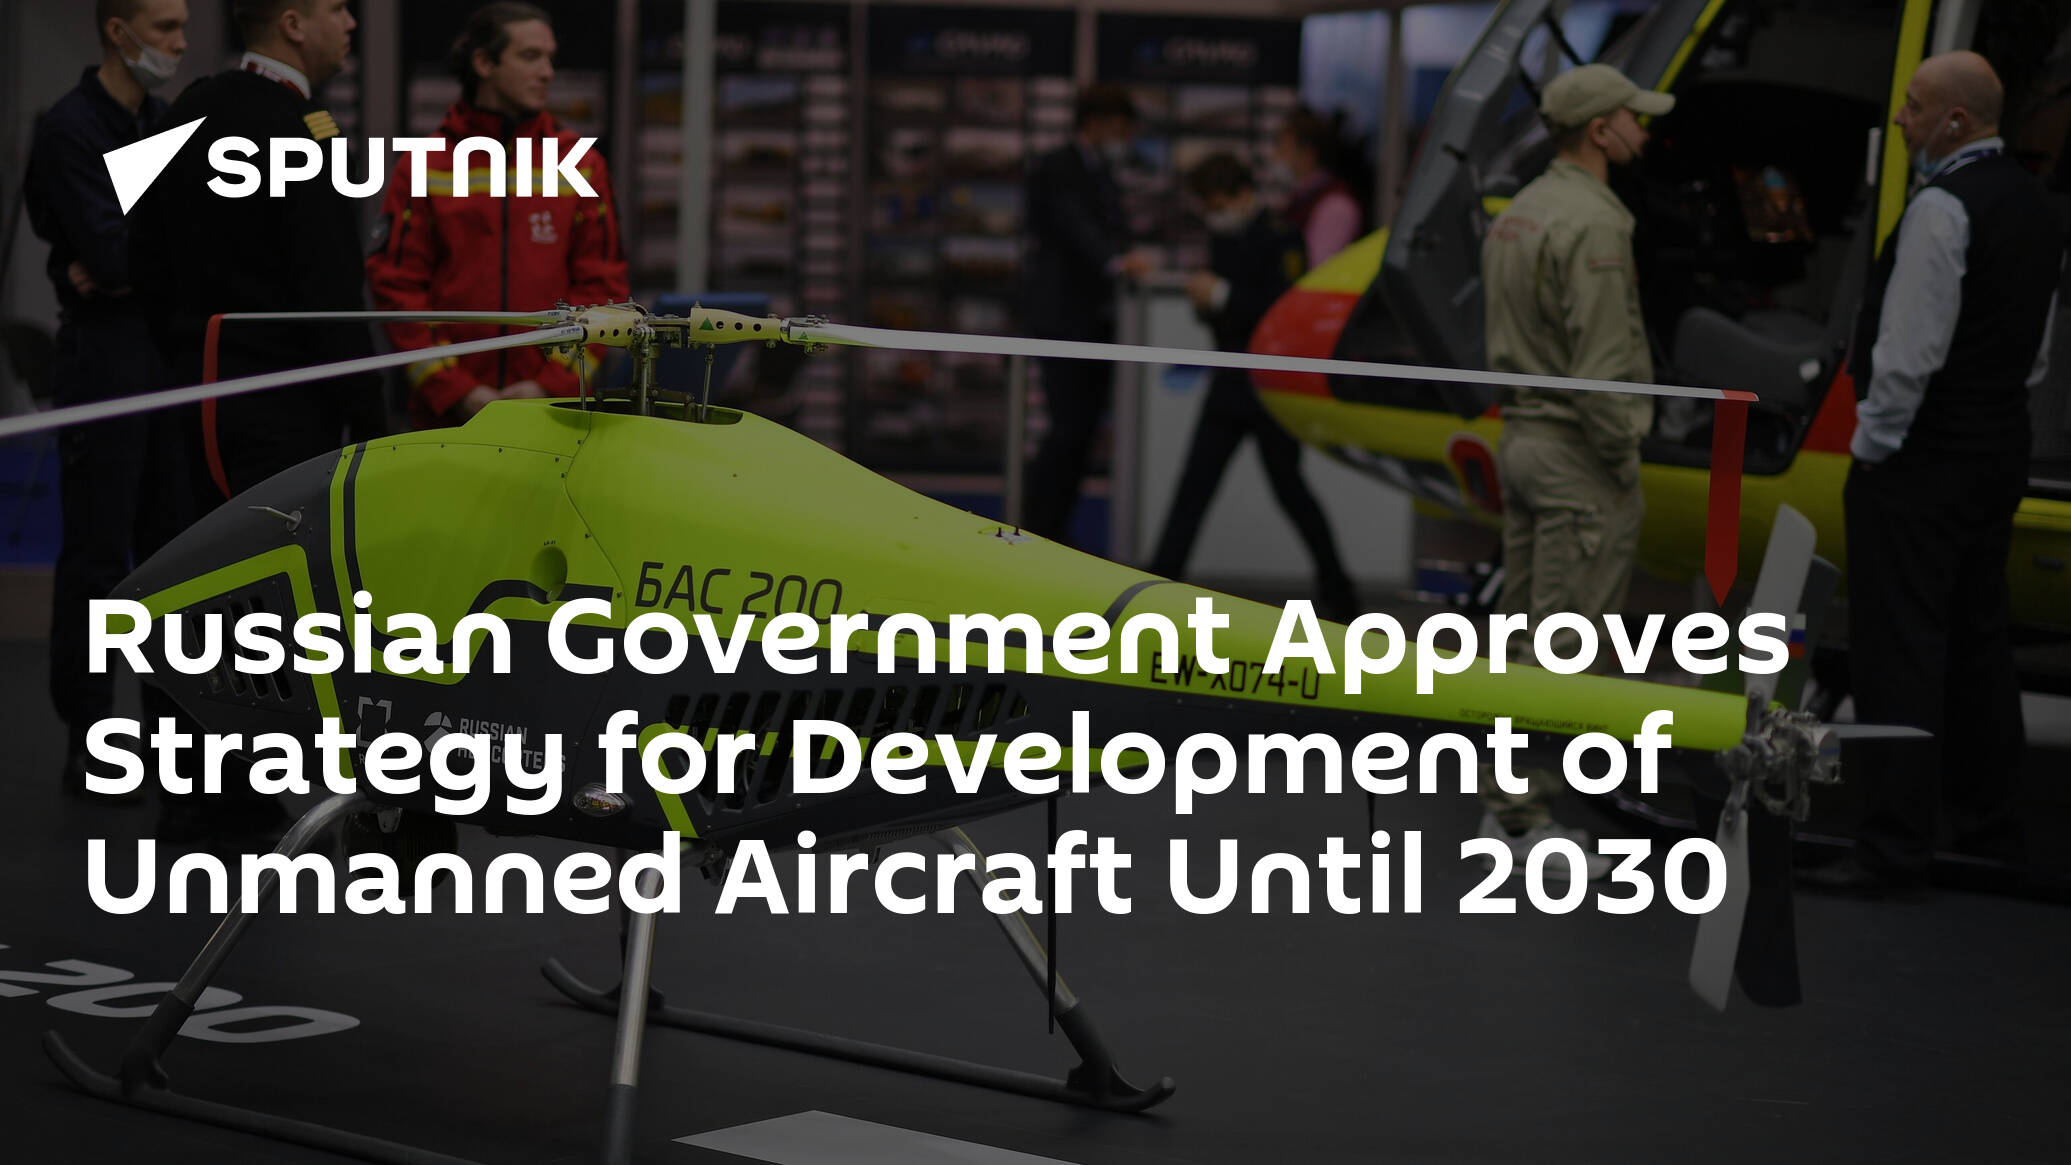 Russian Government Approves Strategy for Development of Unmanned Aircraft Until 2030